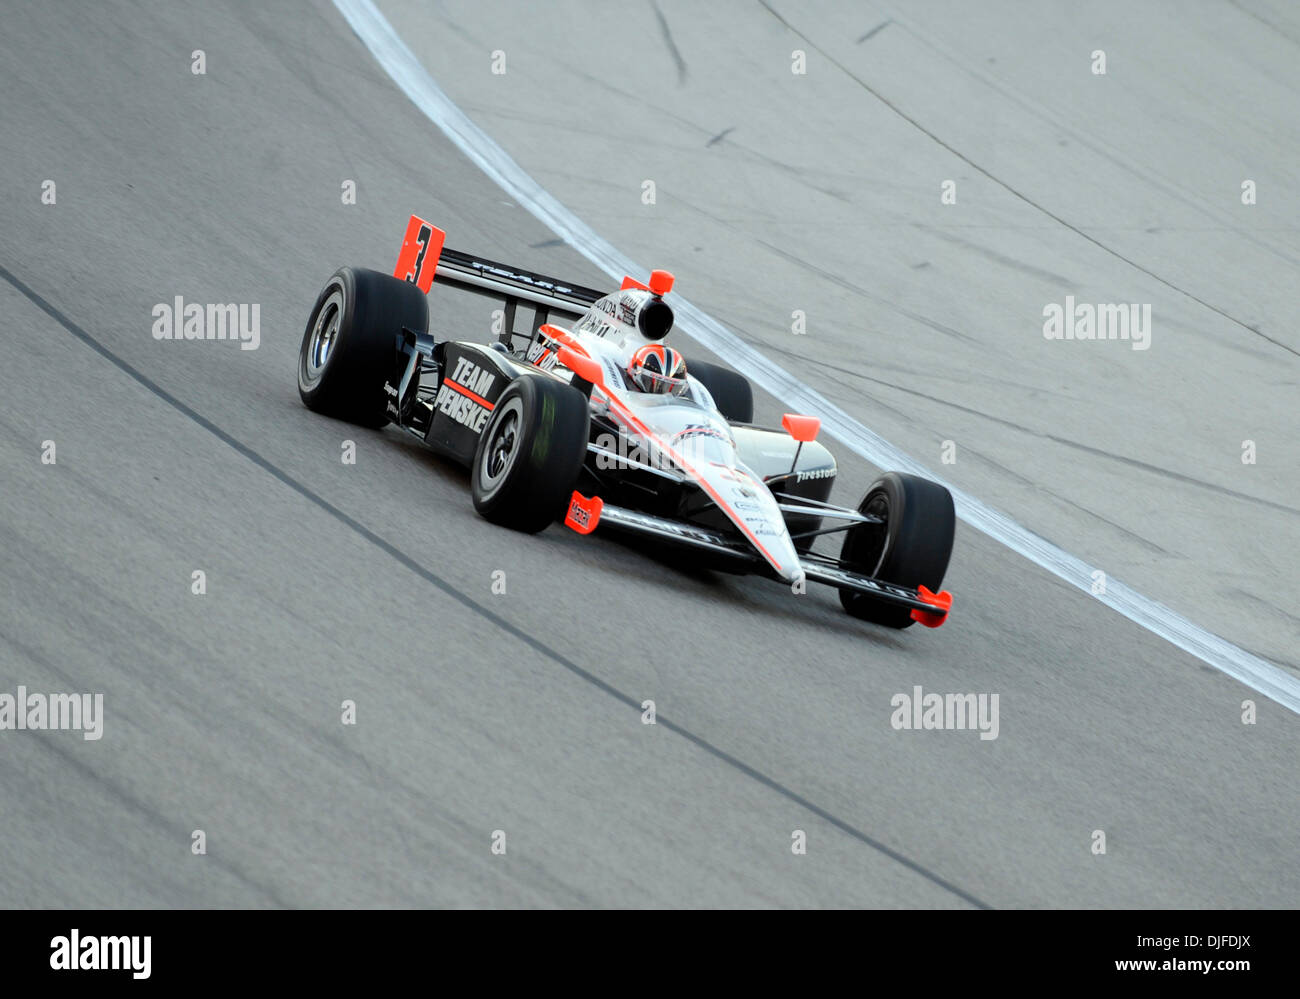 Helio Castroneves of Team Penske at turn one during the IZOD IndyCar Series Firestone 550k at Texas Motor Speedway in Fort Worth, Texas.  Ryan Briscoe of Team Penske won the IZOD IndyCar Series 550k (Credit Image: © Albert Pena/Southcreek Global/ZUMApress.com) Stock Photo